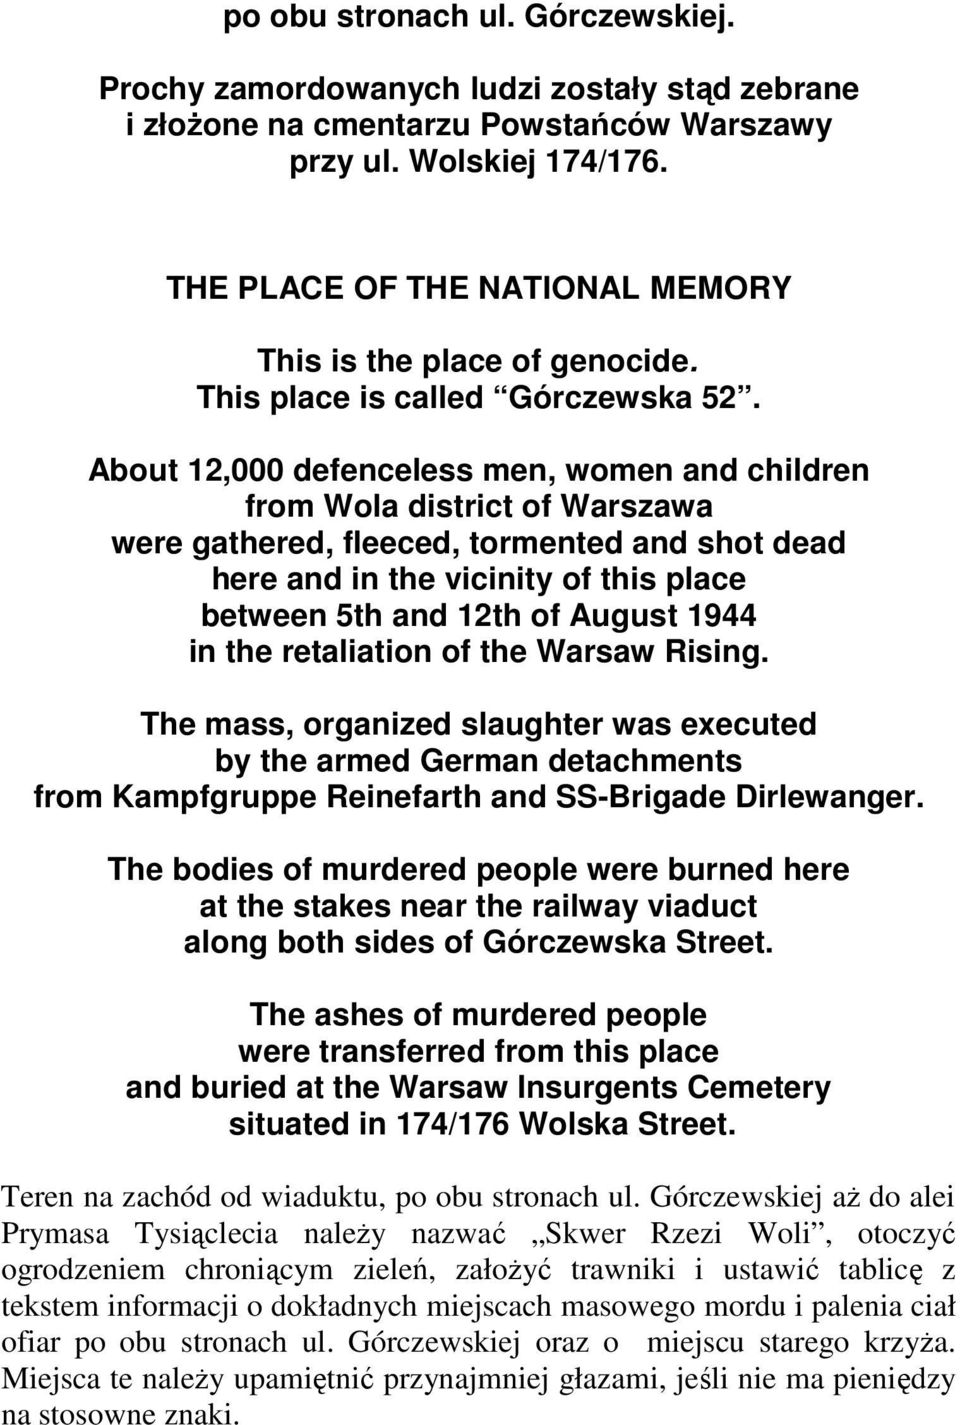 About 12,000 defenceless men, women and children from Wola district of Warszawa were gathered, fleeced, tormented and shot dead here and in the vicinity of this place between 5th and 12th of August